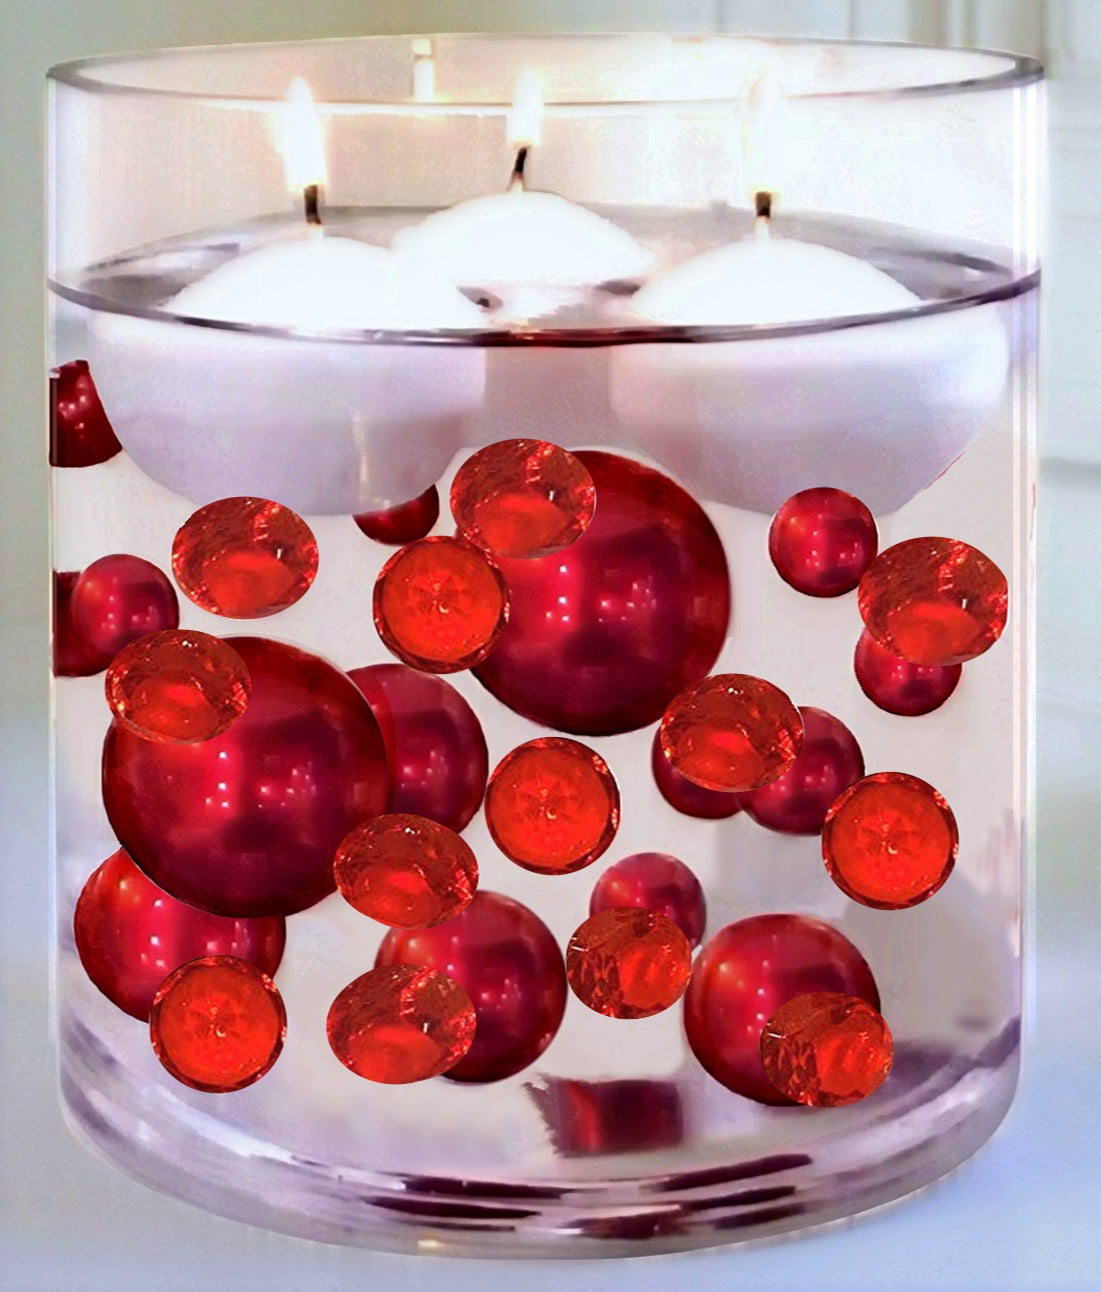 *CLEARANCE* 1 LB. Red Sparkling Diamond Gems - Jumbo Vase Decorations and Table Scatter